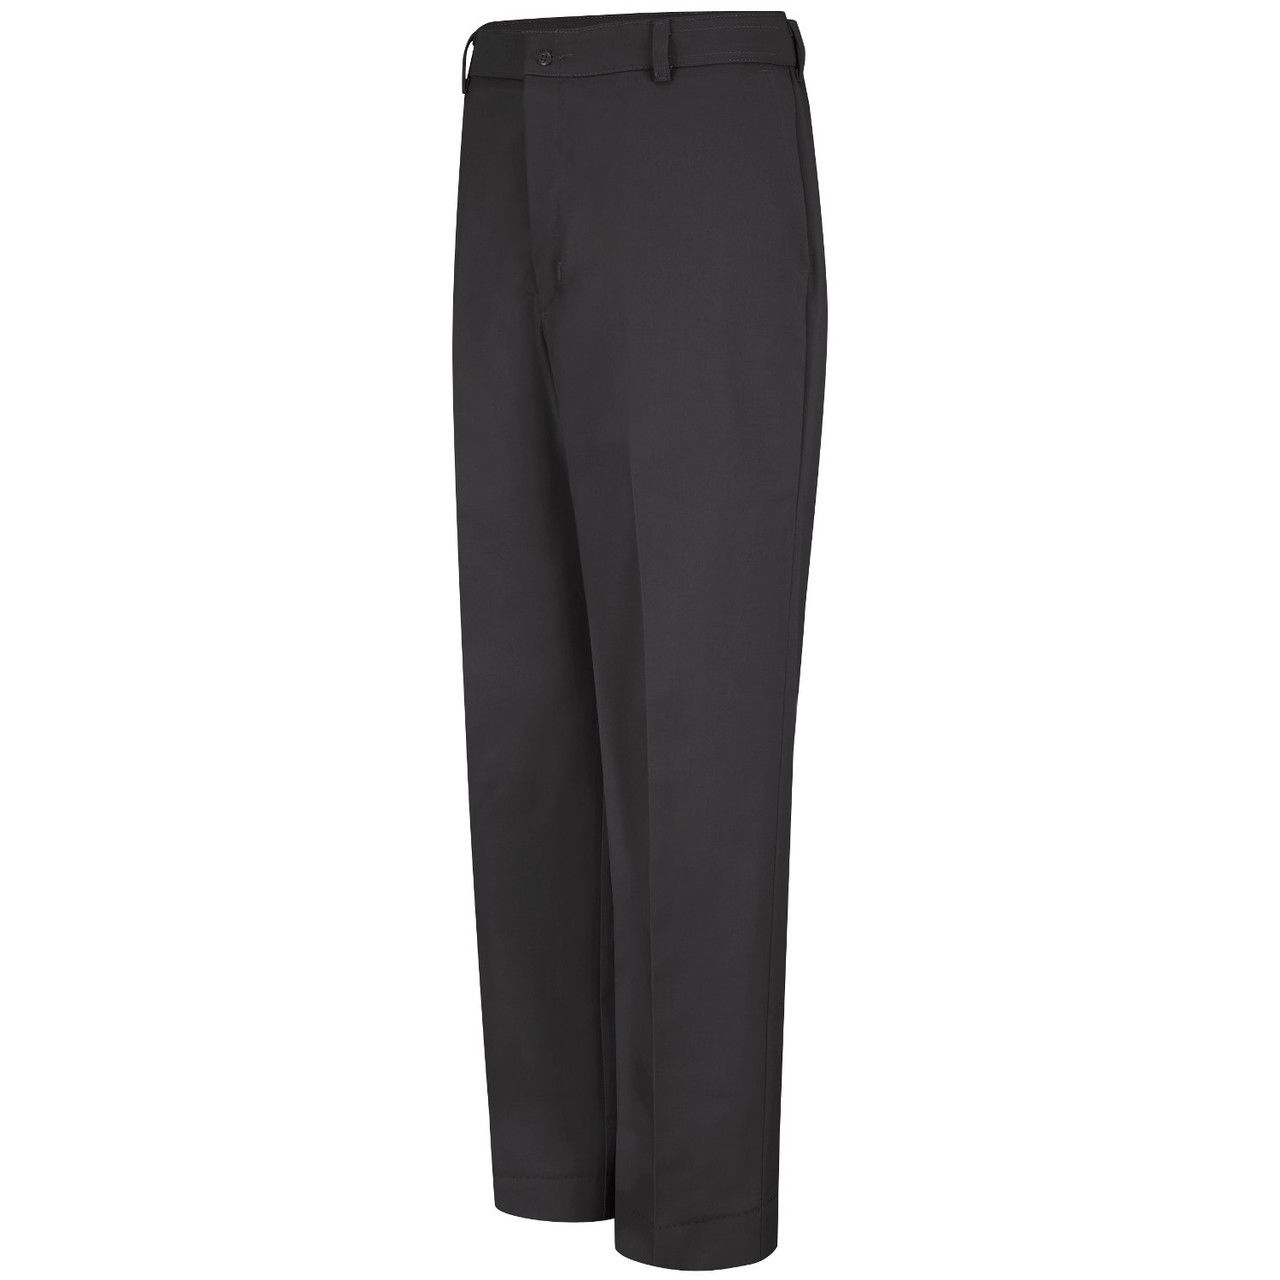 What are the main attributes of the Red Kap PT20 Dura-Kap Industrial Pants in Black?